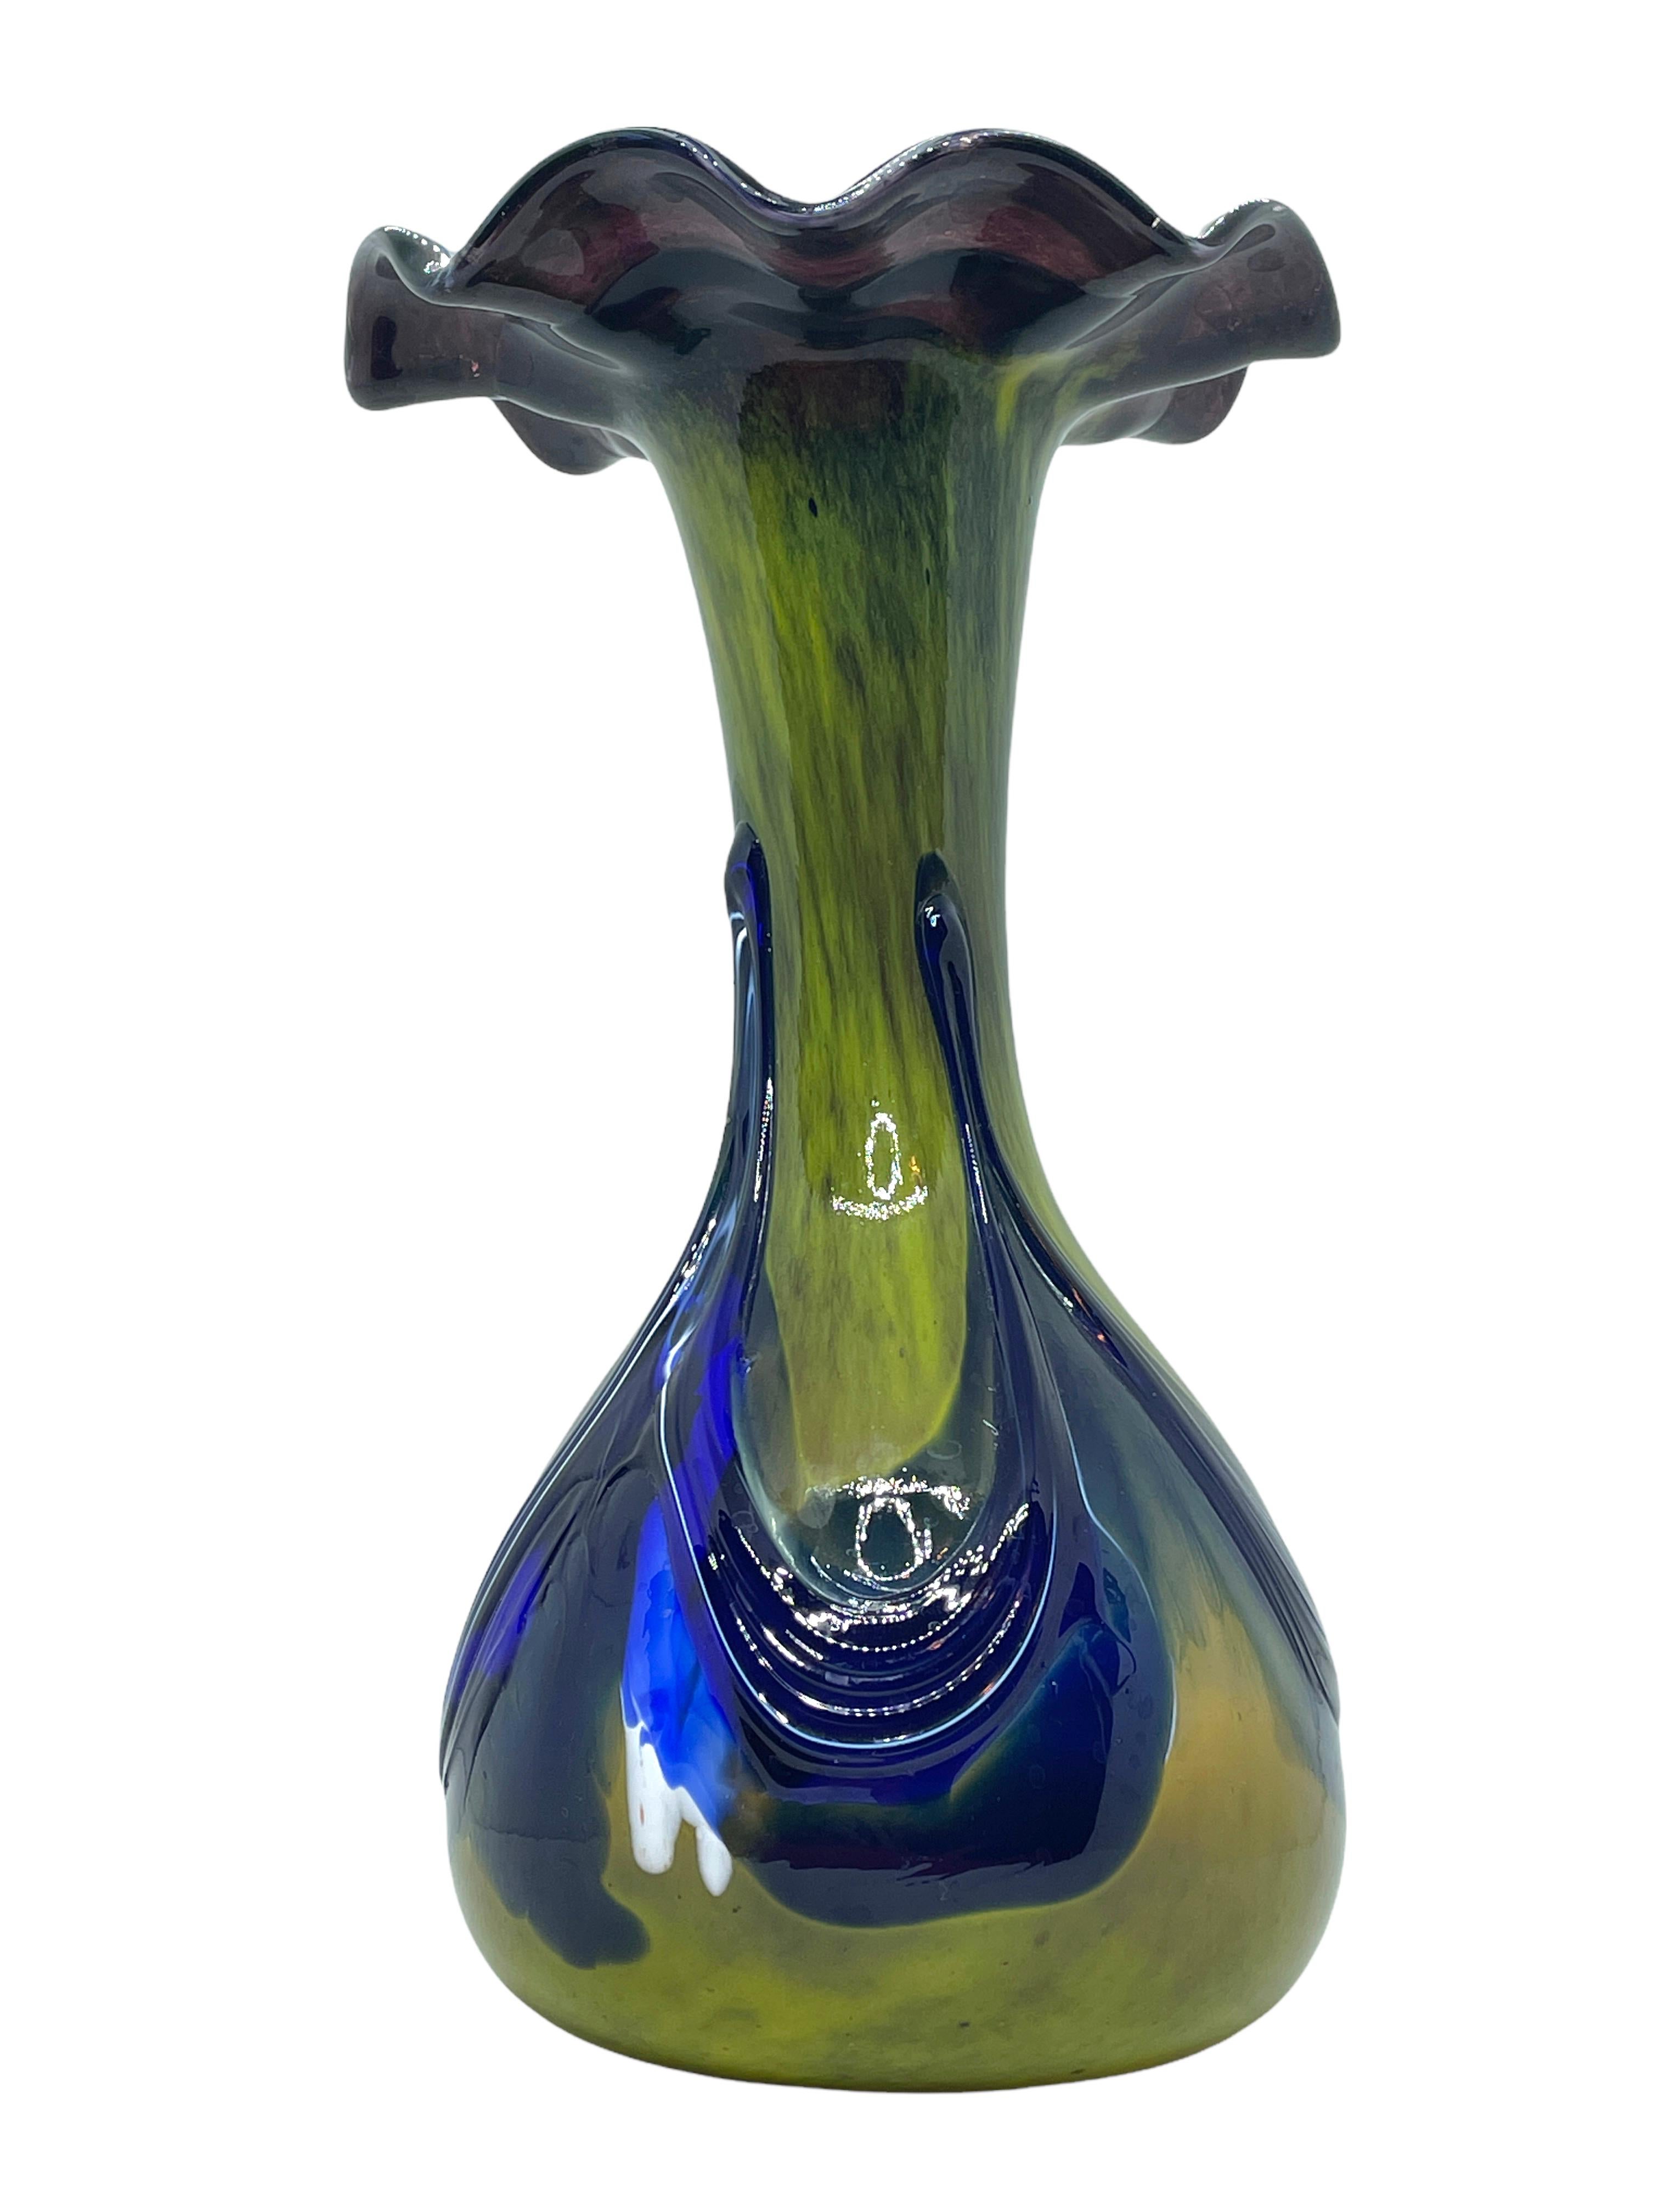 A beautiful glass vase with a frill inlet designed by a Murano Glassworker in Venice Italy in the 1980s. A vase made by hand with green glass with details made of blue glass. The collector’s item, preserved in very good condition, has minimal traces